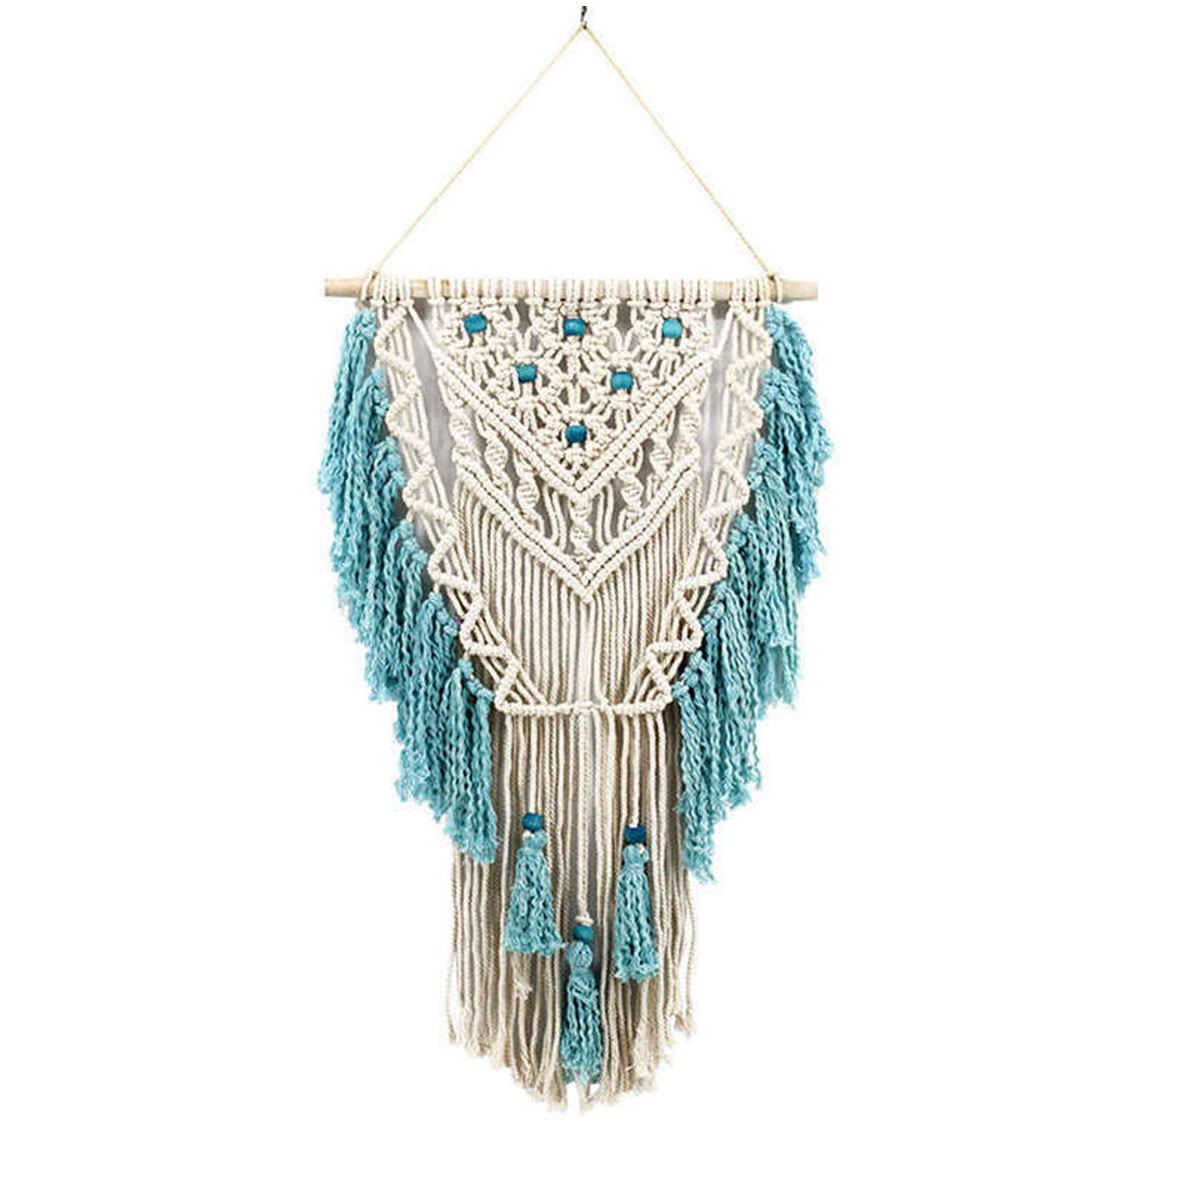 Hand-Knotted-Macrame-Wall-Art-Handmade-Bohemian-Hanging-Tapestry-Room-Decorations-1637667-5